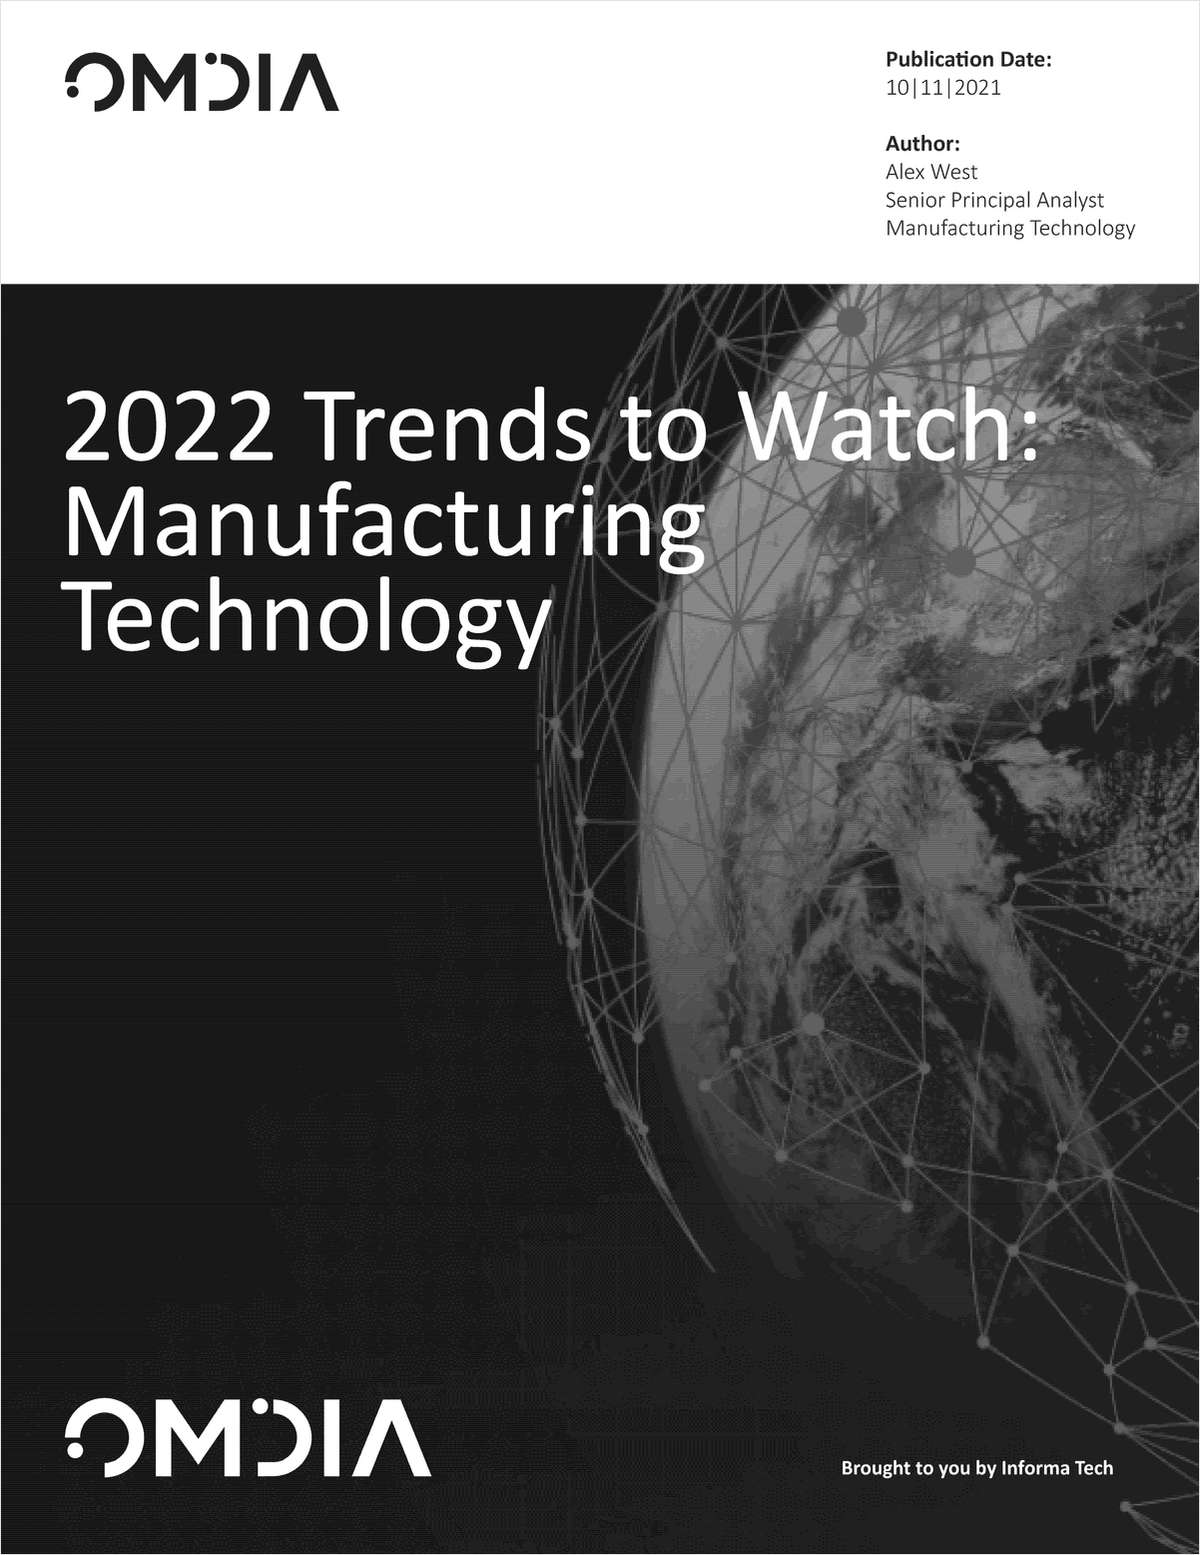 Trends for 2022 -- Manufacturing Technology